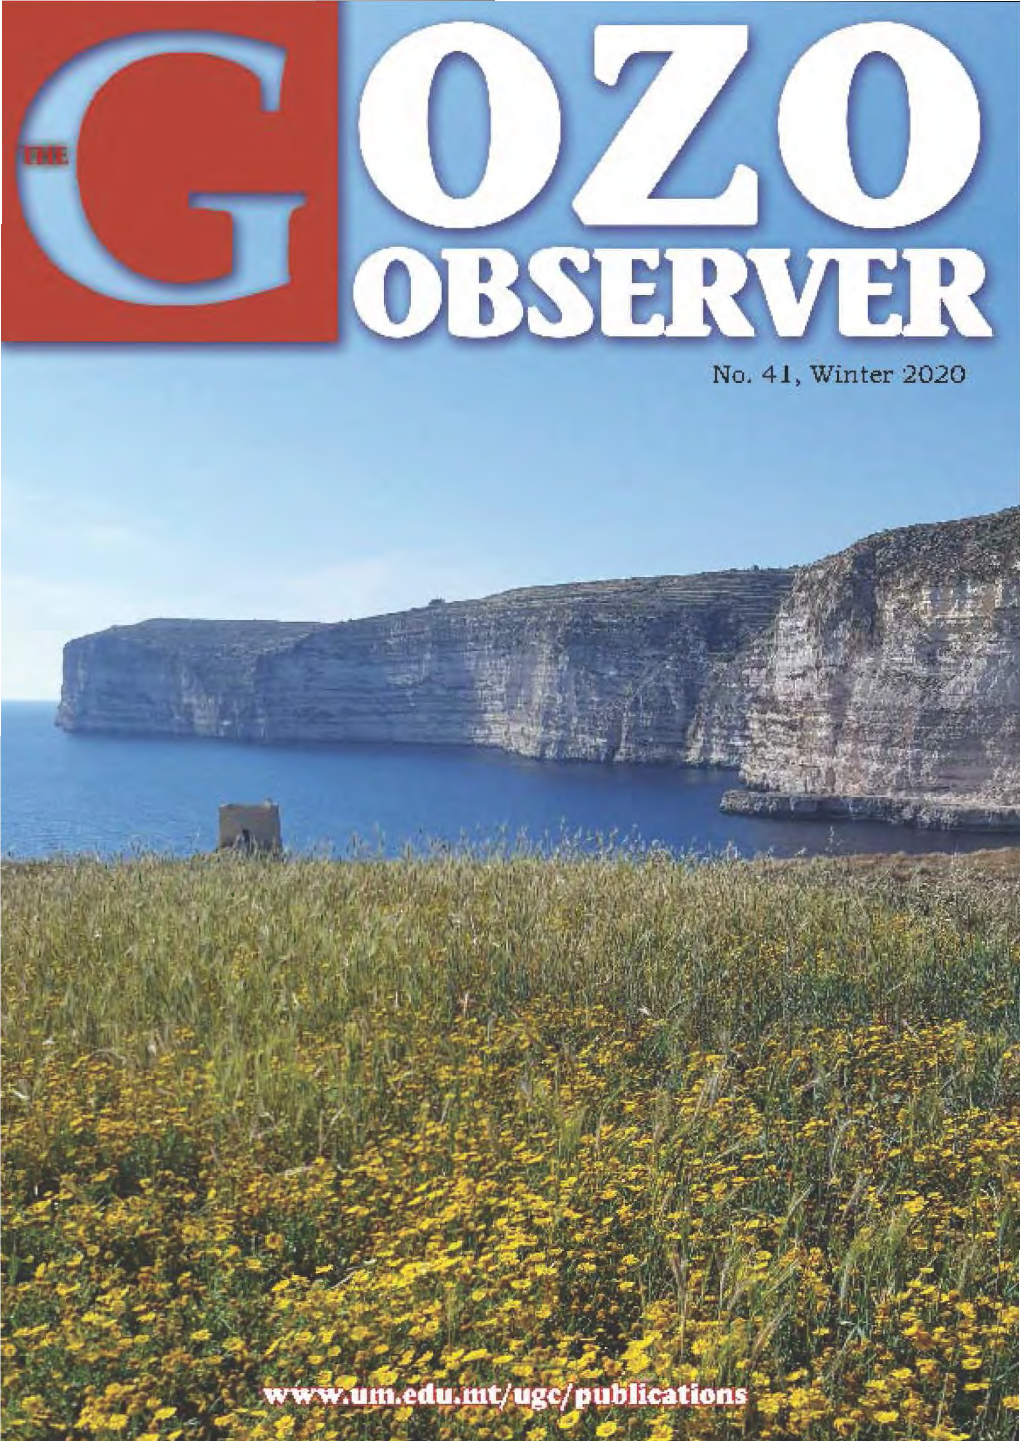 The Gozo Observer : Issue 41 : Winter 2020